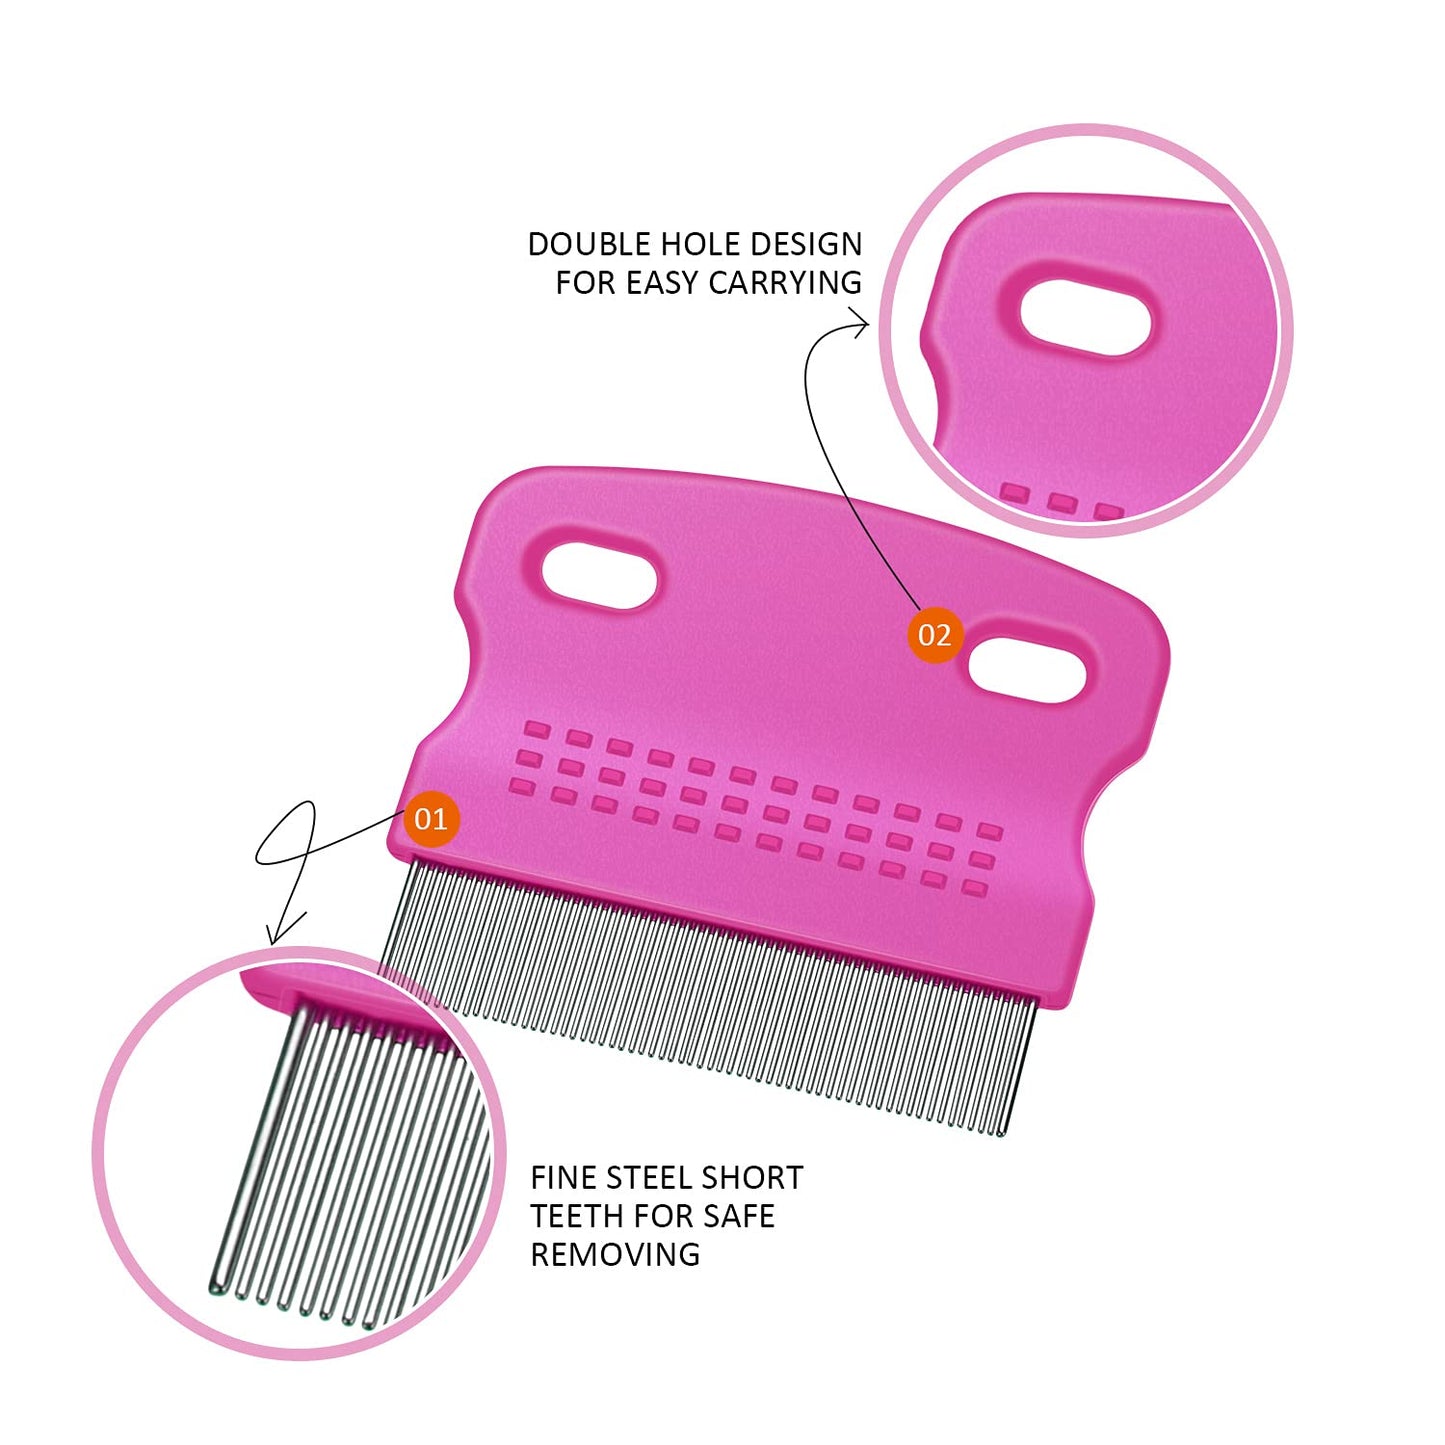 6 Pieces Pet Lice Combs Dog Grooming Flea Comb Cat Tear Stain Comb for Removal Dandruff, Hair Stain, Nit (White, Yellow, Green, Purple, Orange, Dark Blue)